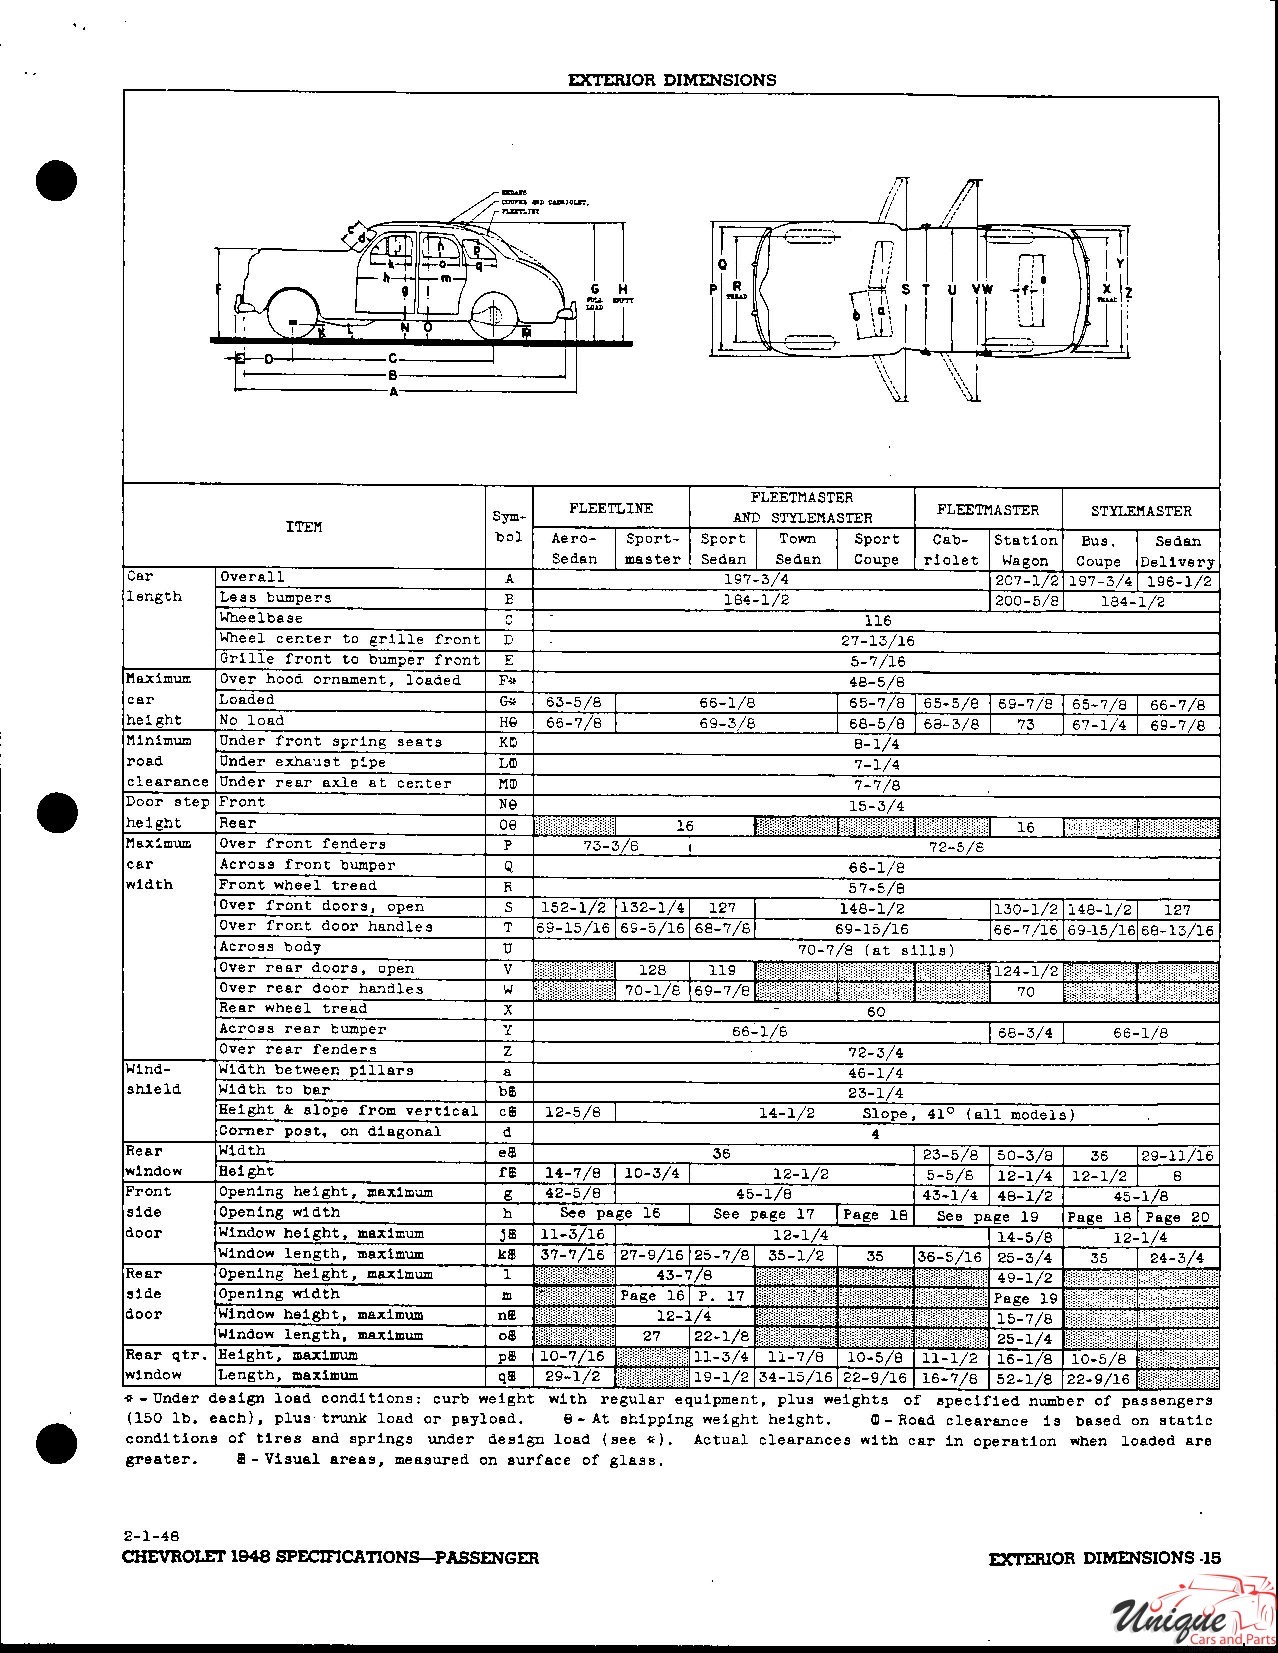 1948 Chevrolet Specifications Page 36